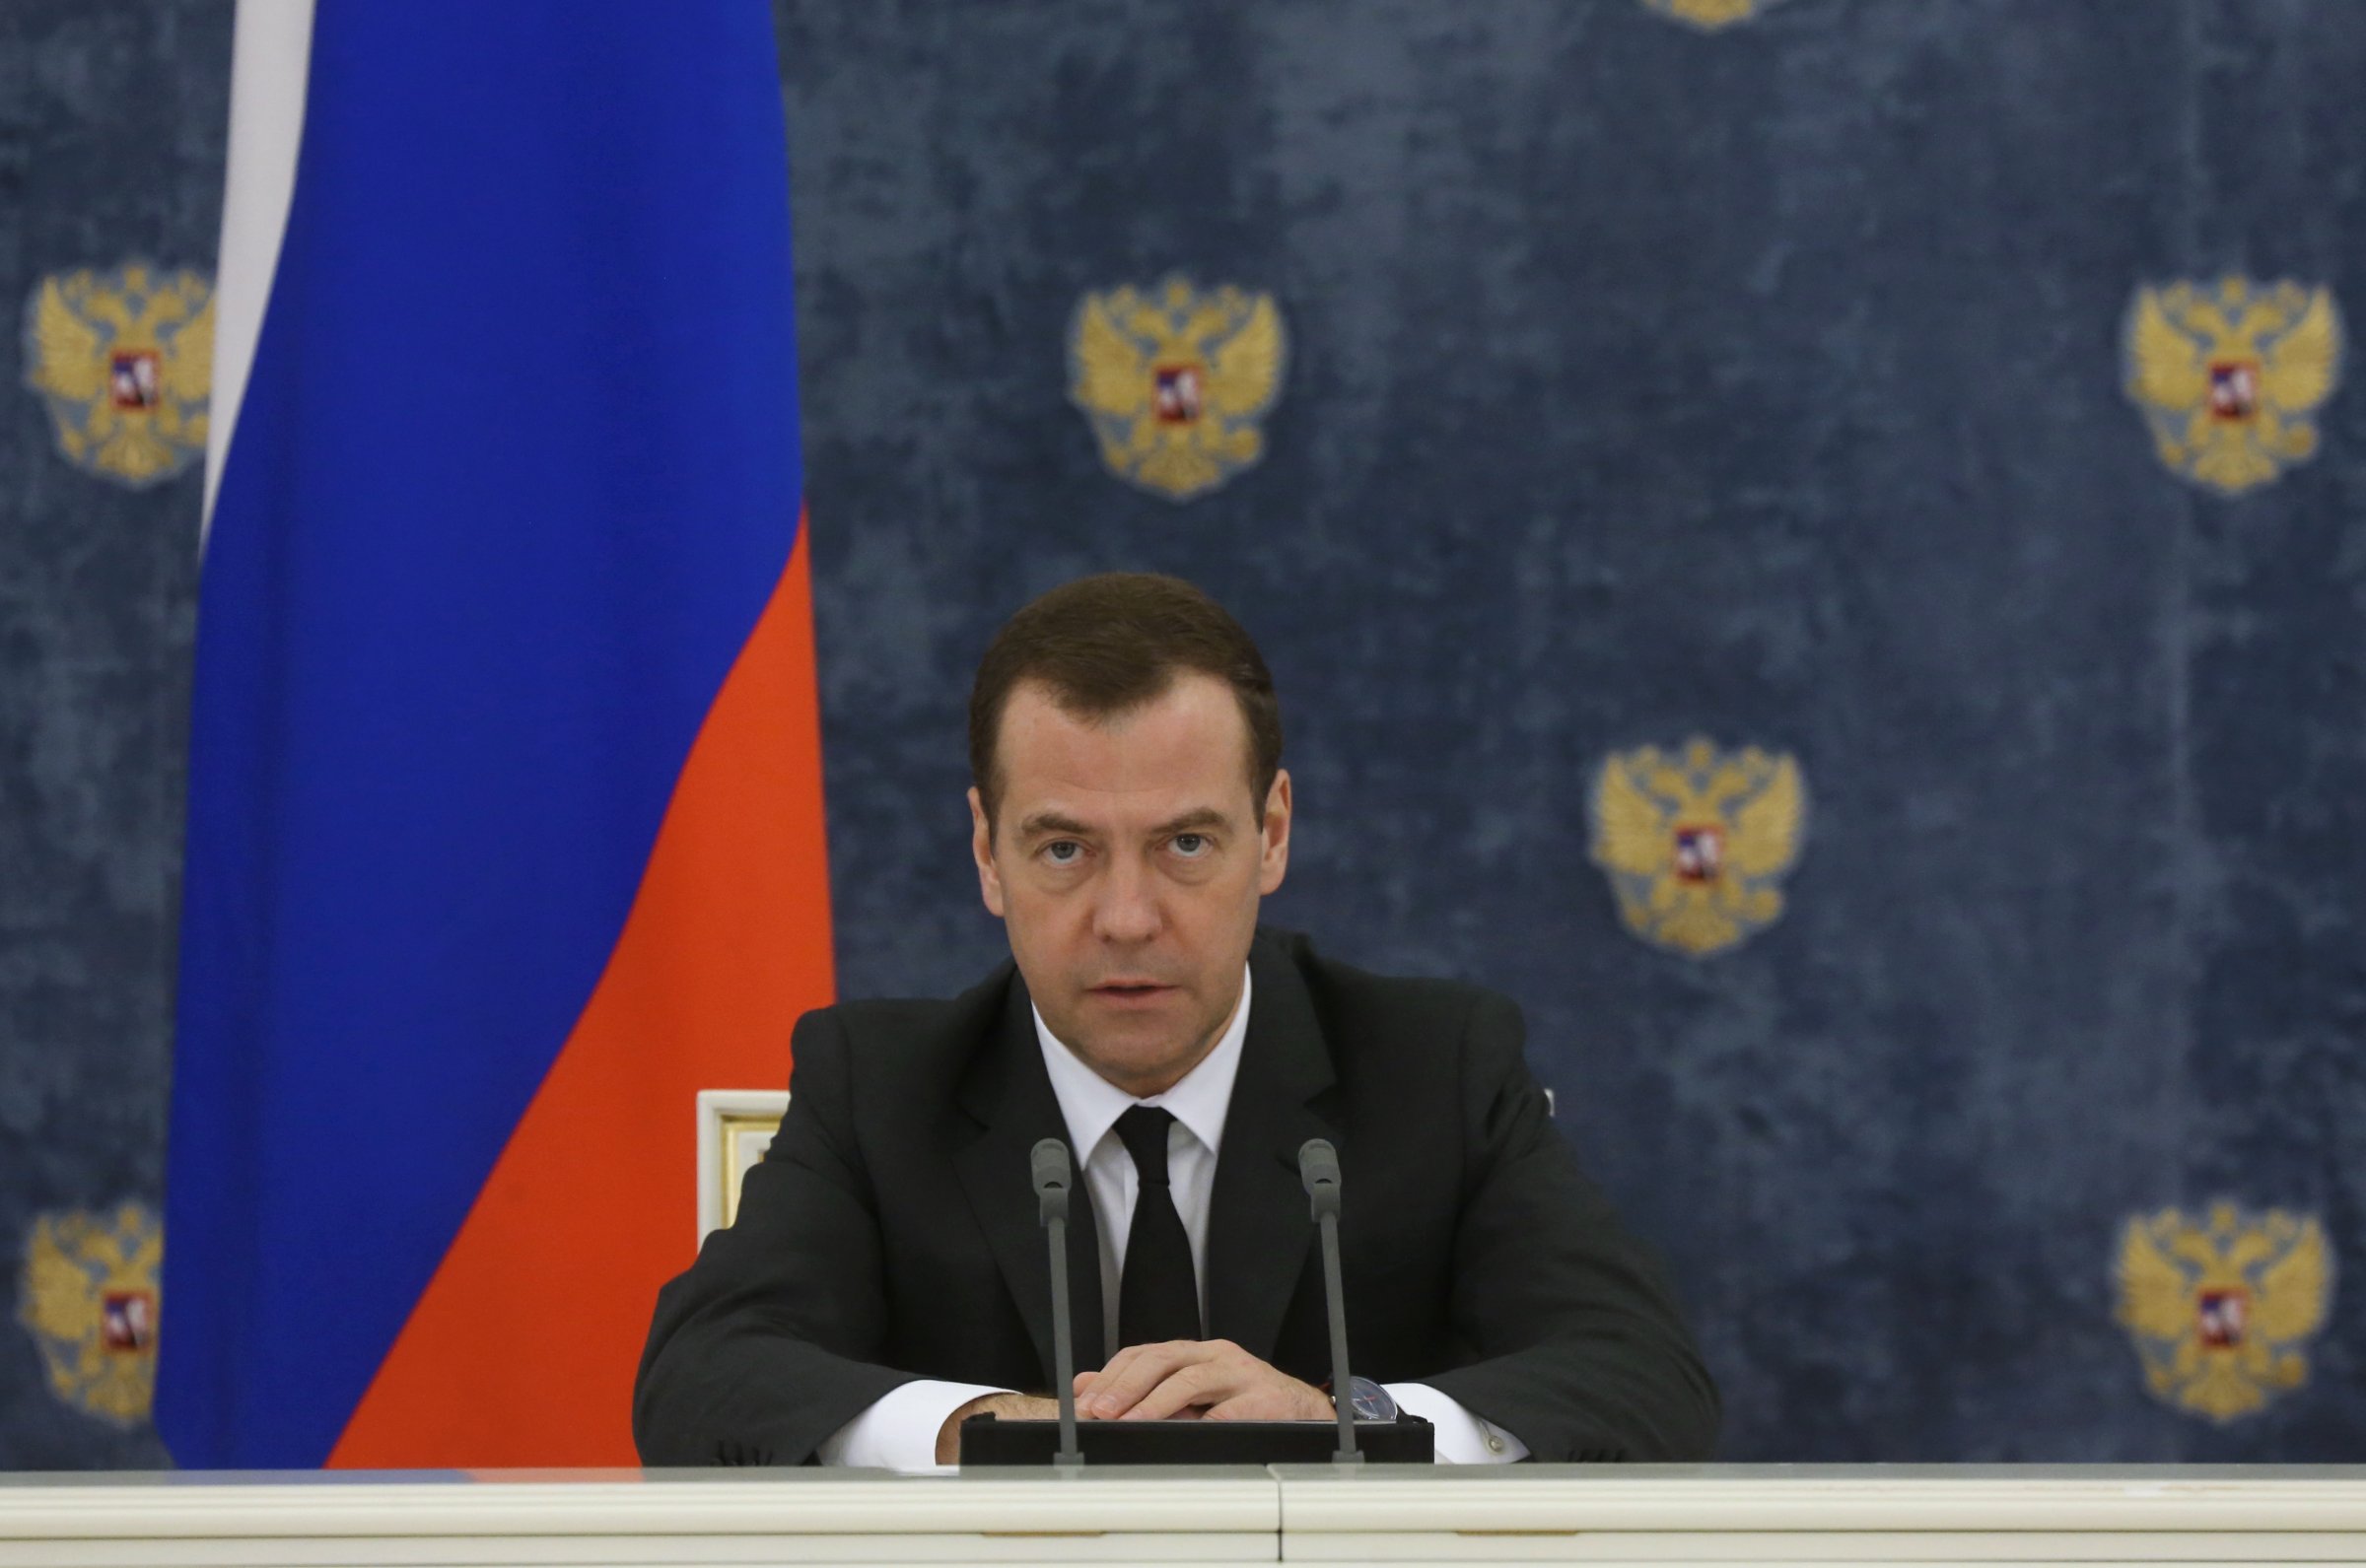 Prime Minister Dmitry Medvedev chairs conference on higher budget spending efficiency